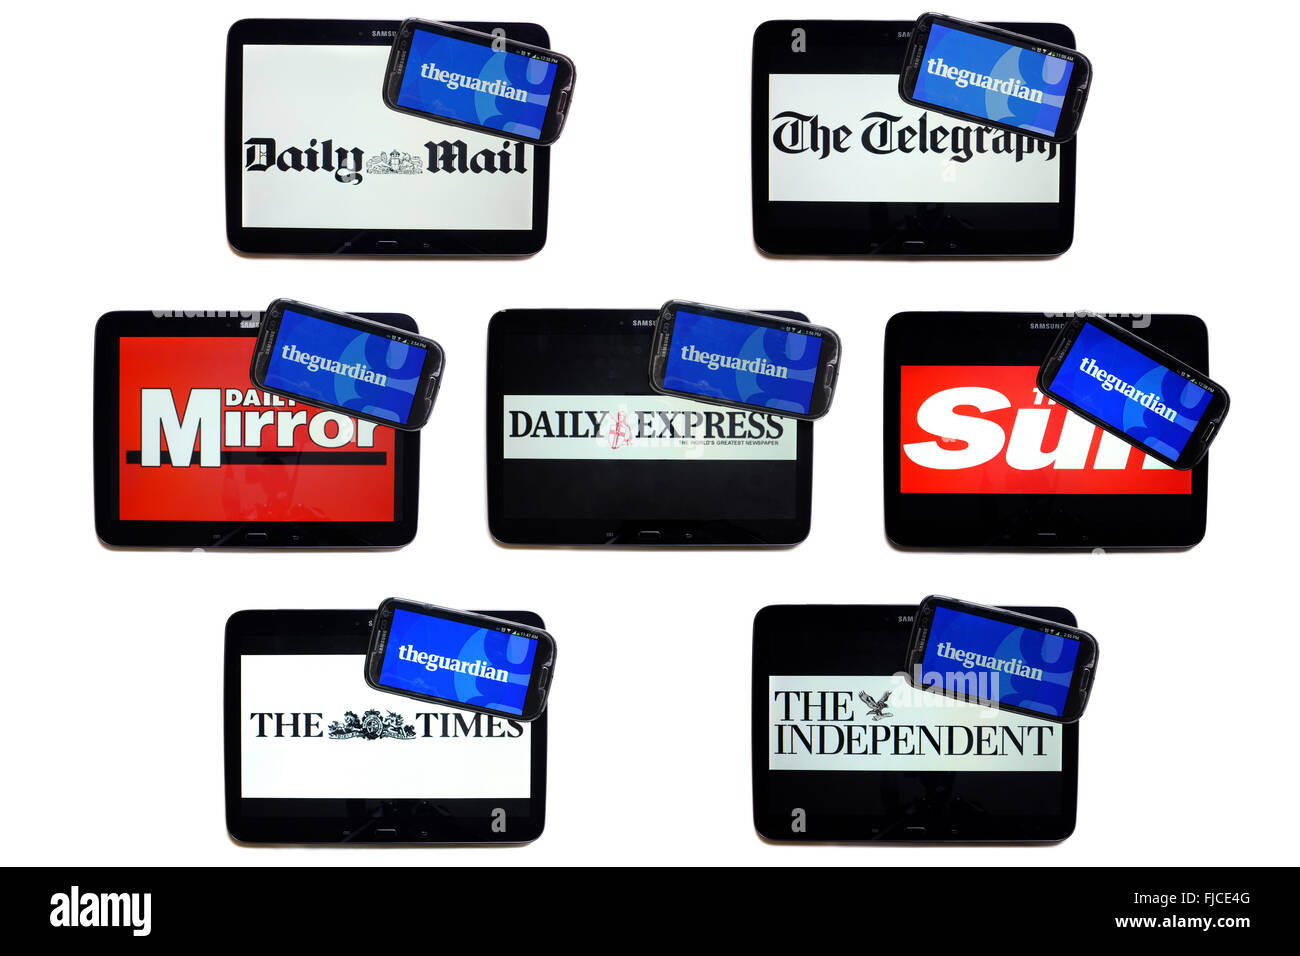 The Guardian newspaper logo on smartphone screens surrounded by tablets displaying the logos of rival newspapers. Stock Photo